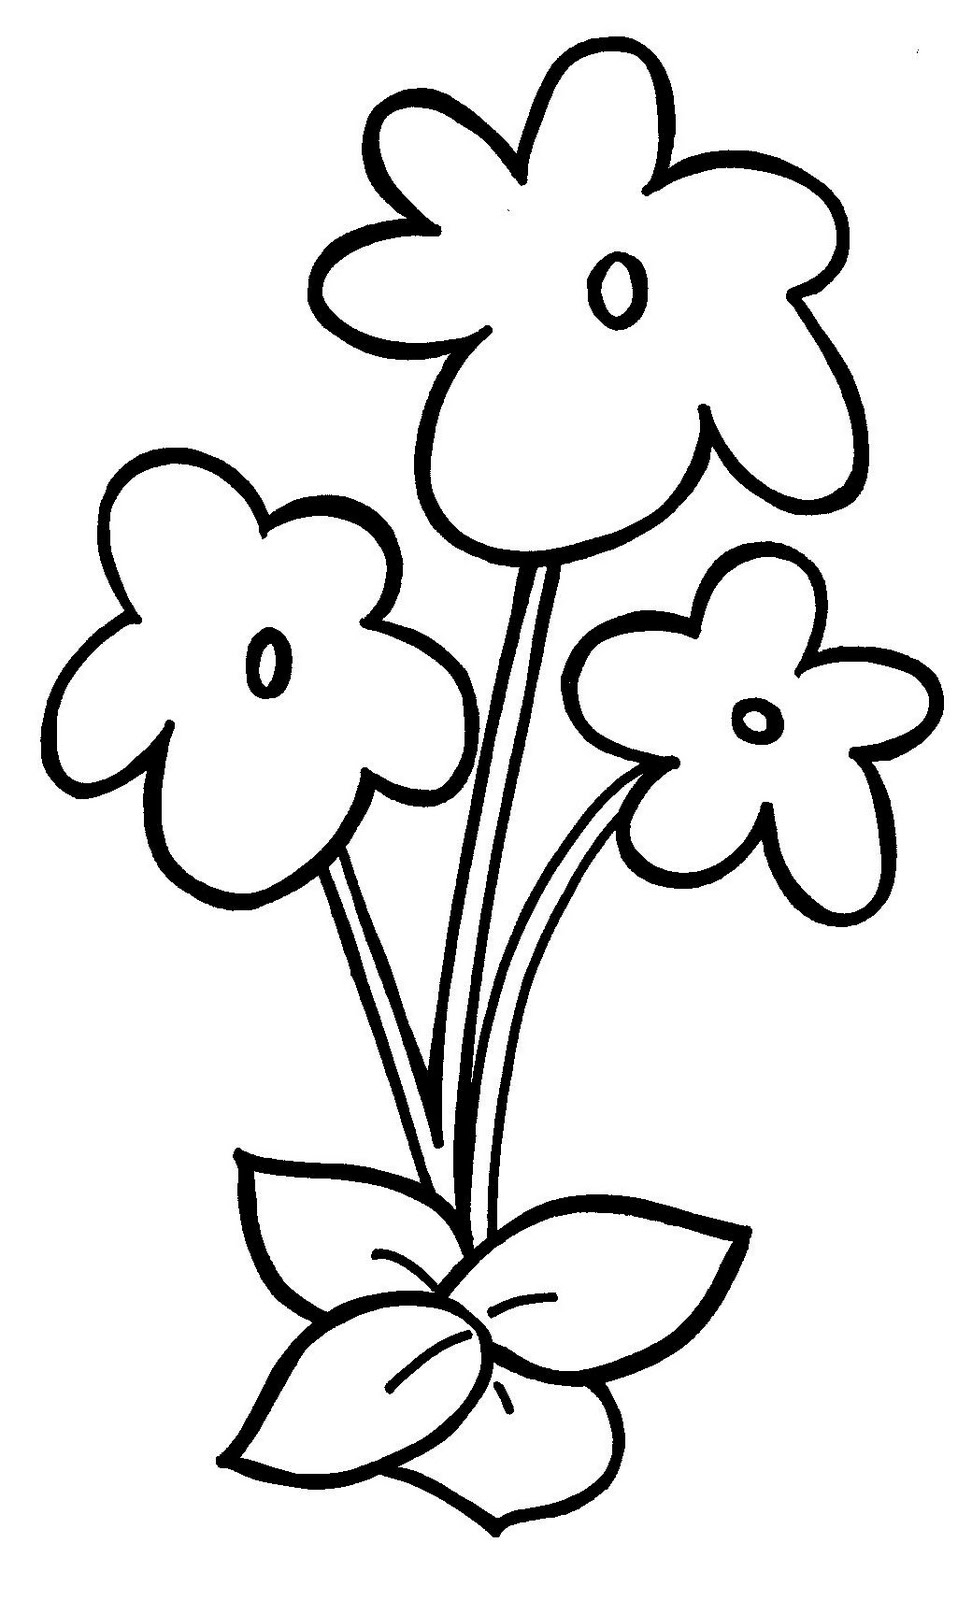 printable-paper-flower-template-cut-out-get-what-you-need-for-free